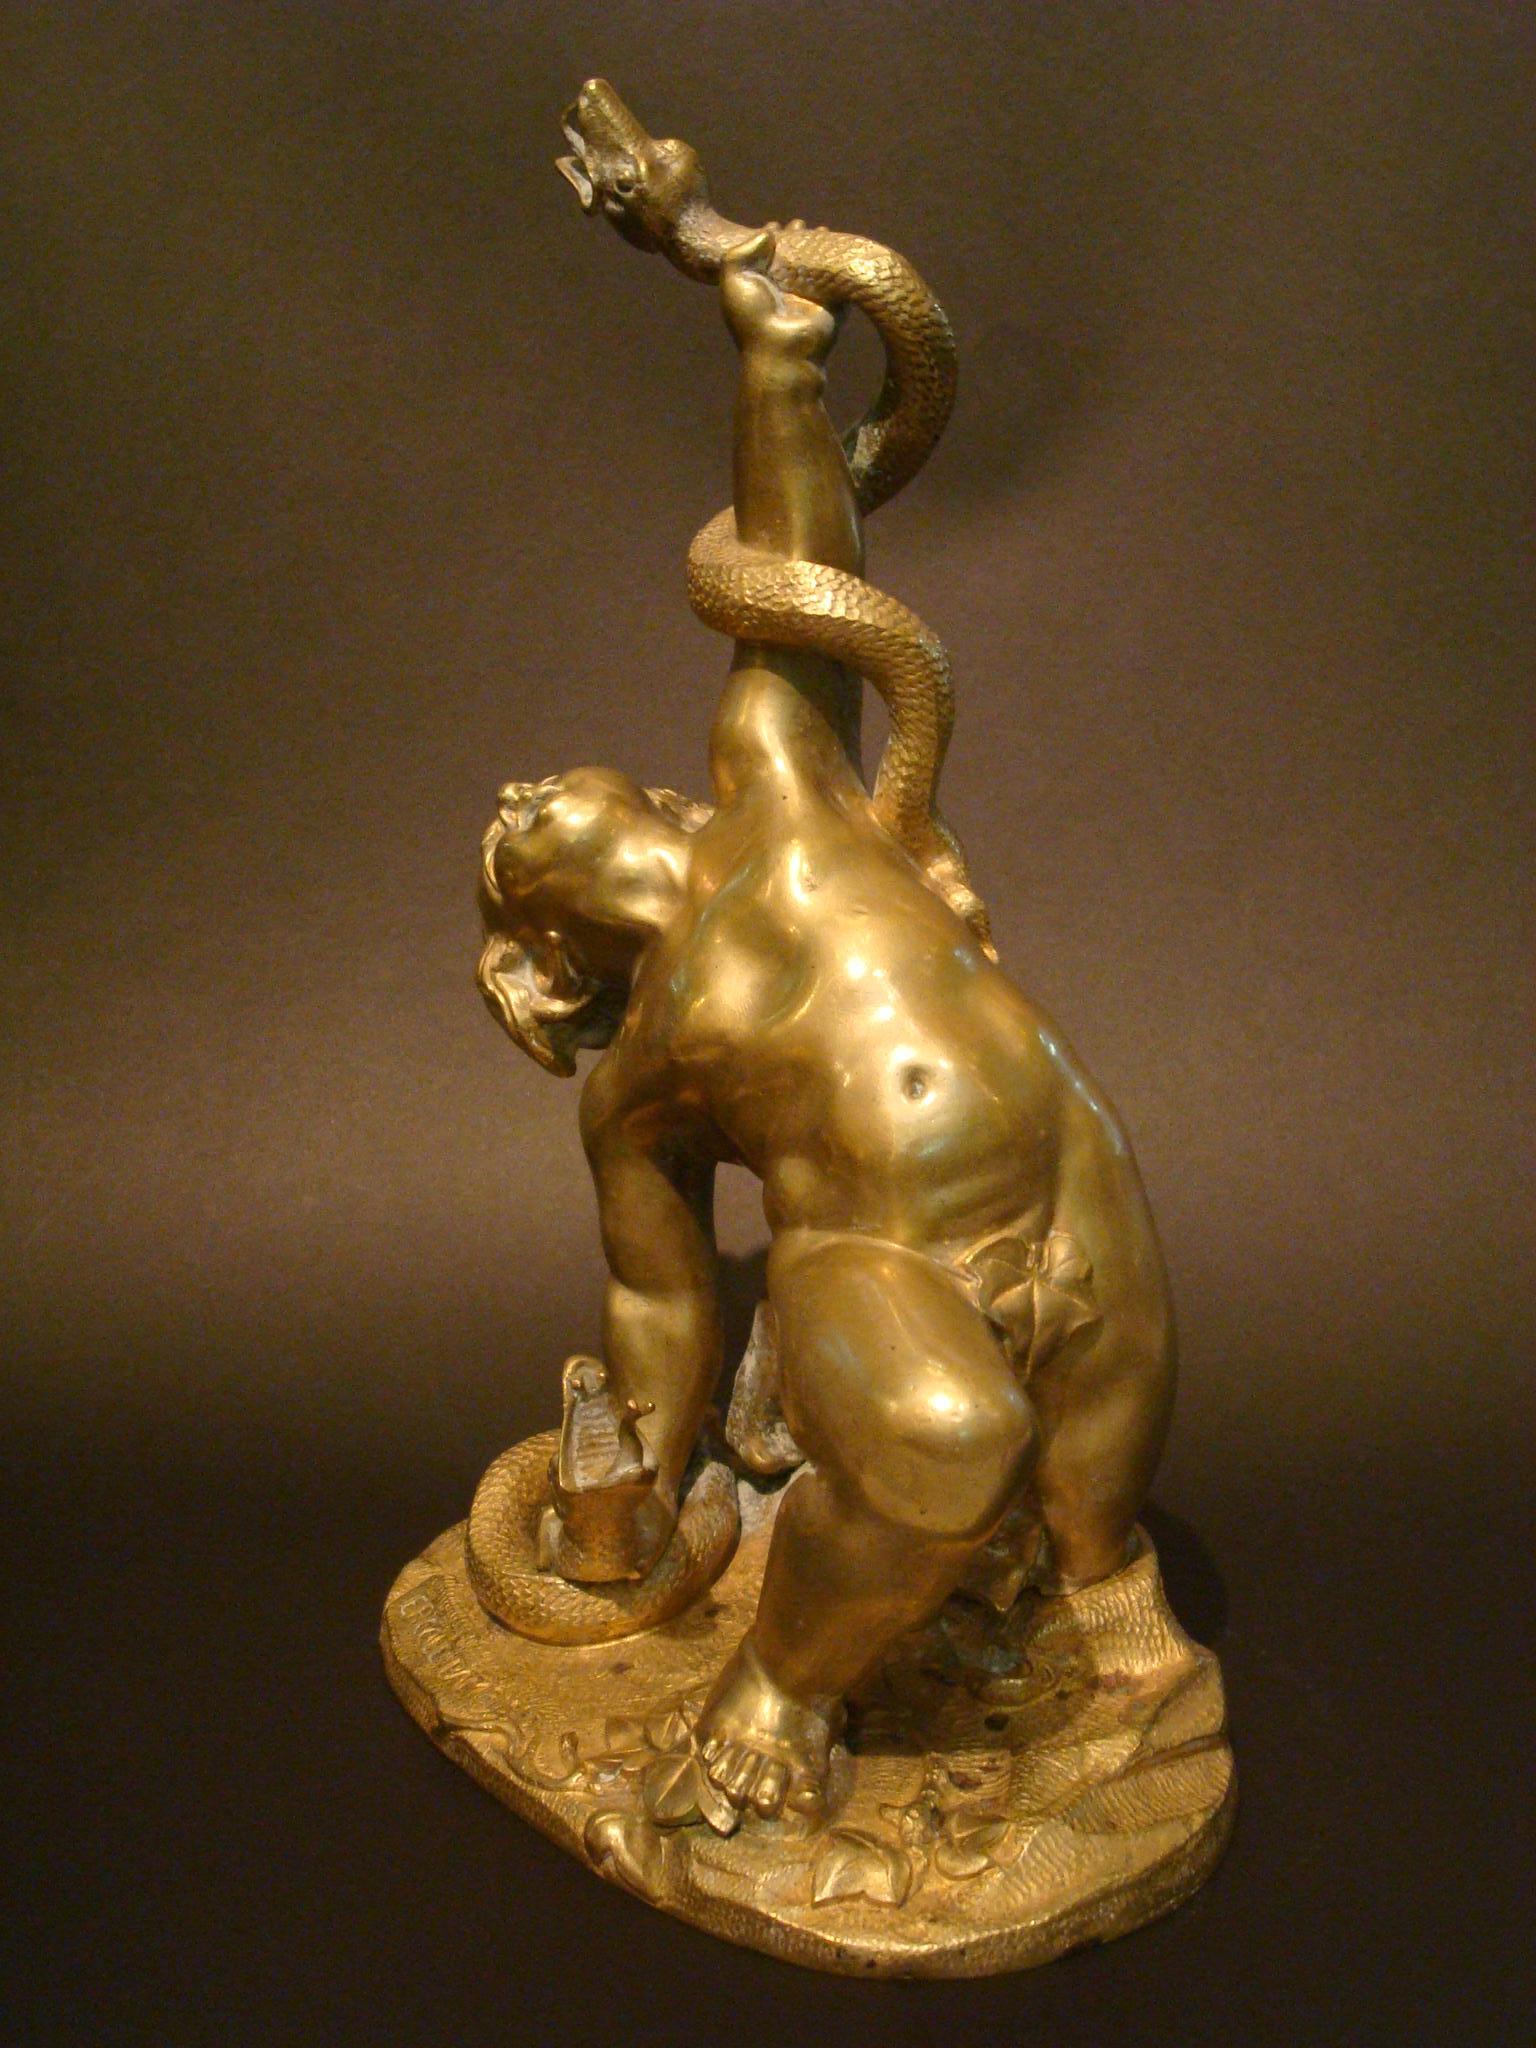 A bronze sculpture figure representing Hercules as a young child wrestling two snakes.
Marked Ercole Bambino. Fantastic details.
Hércules / Heracles had a god as one of his parents, being the son of Júpiter / Zeus and a mortal woman named Alcmene.